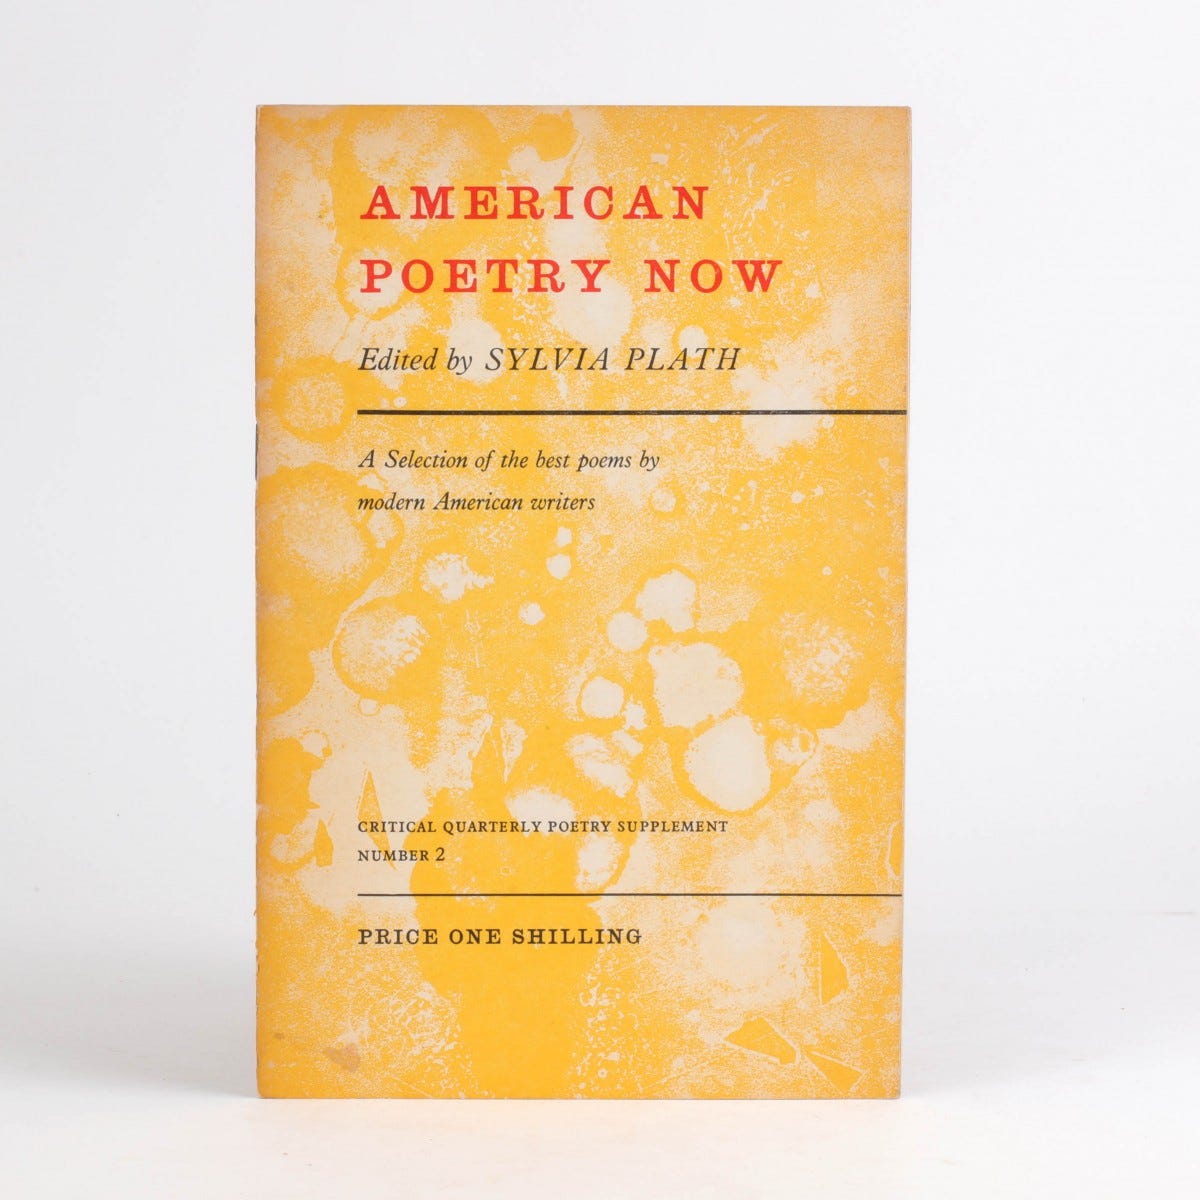 American Poetry Now pamphlet with mottled yellow cover